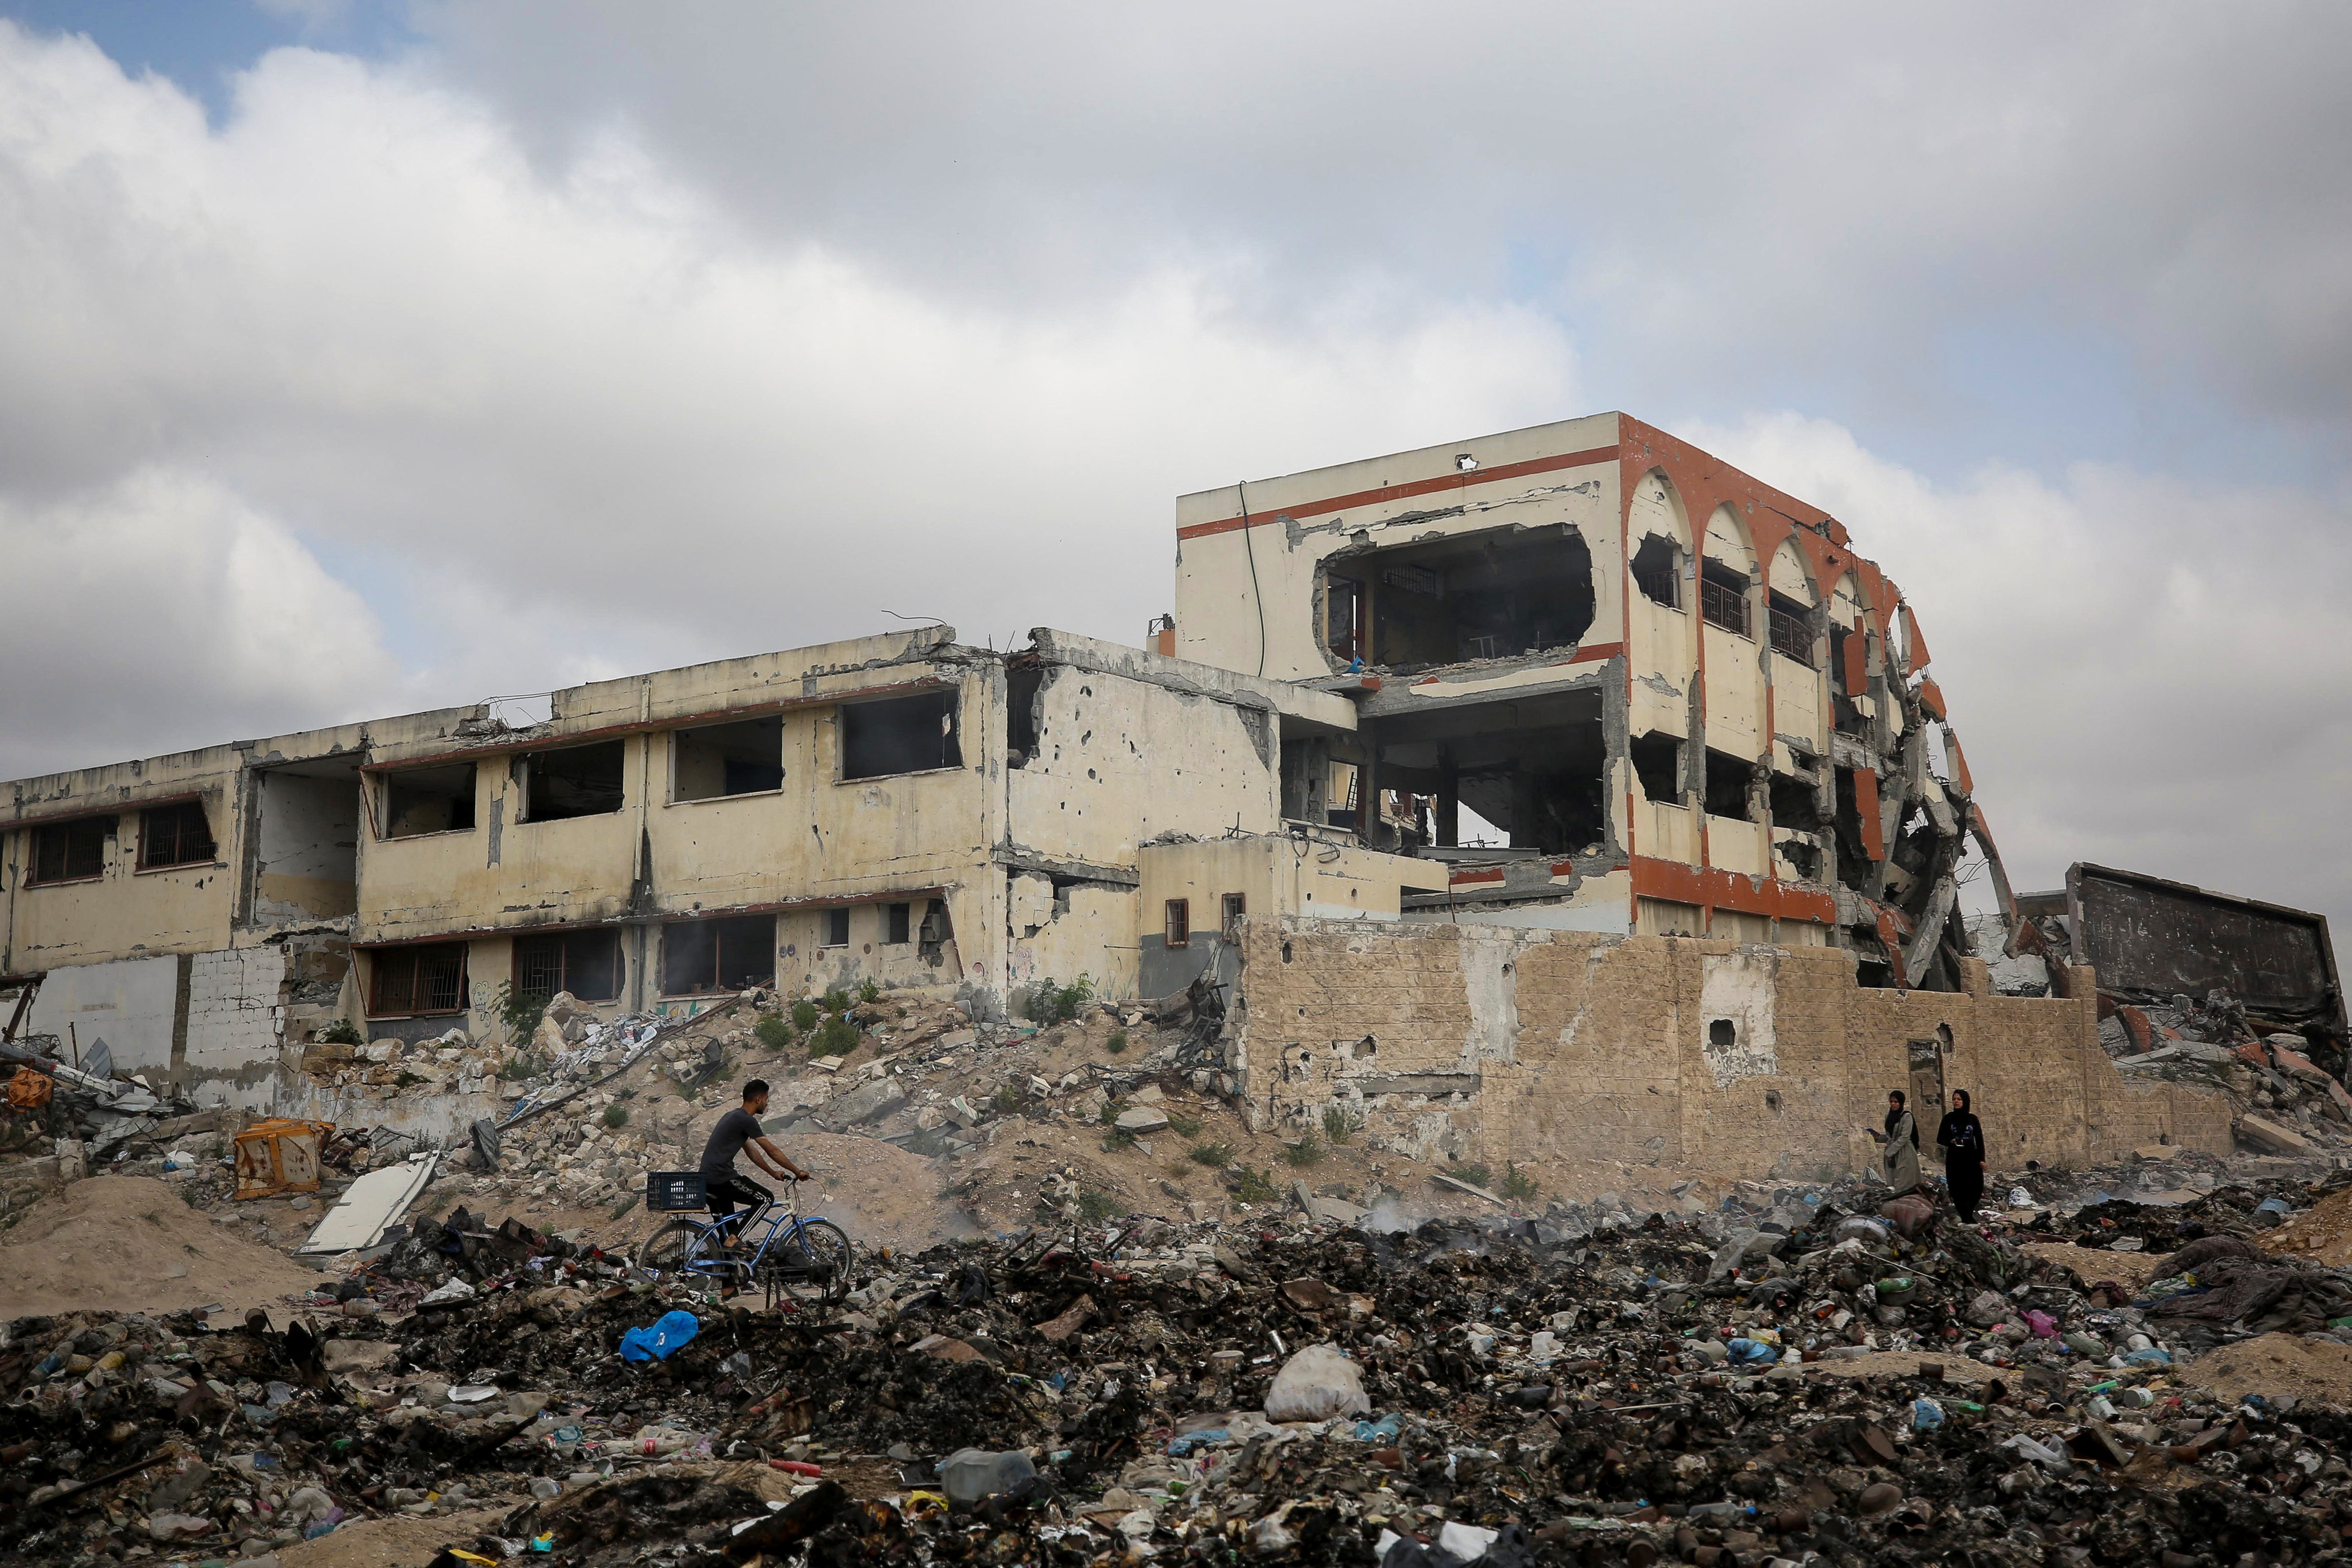 Palestinians pass by a school destroyed during Israel's military offensive, in Gaza City